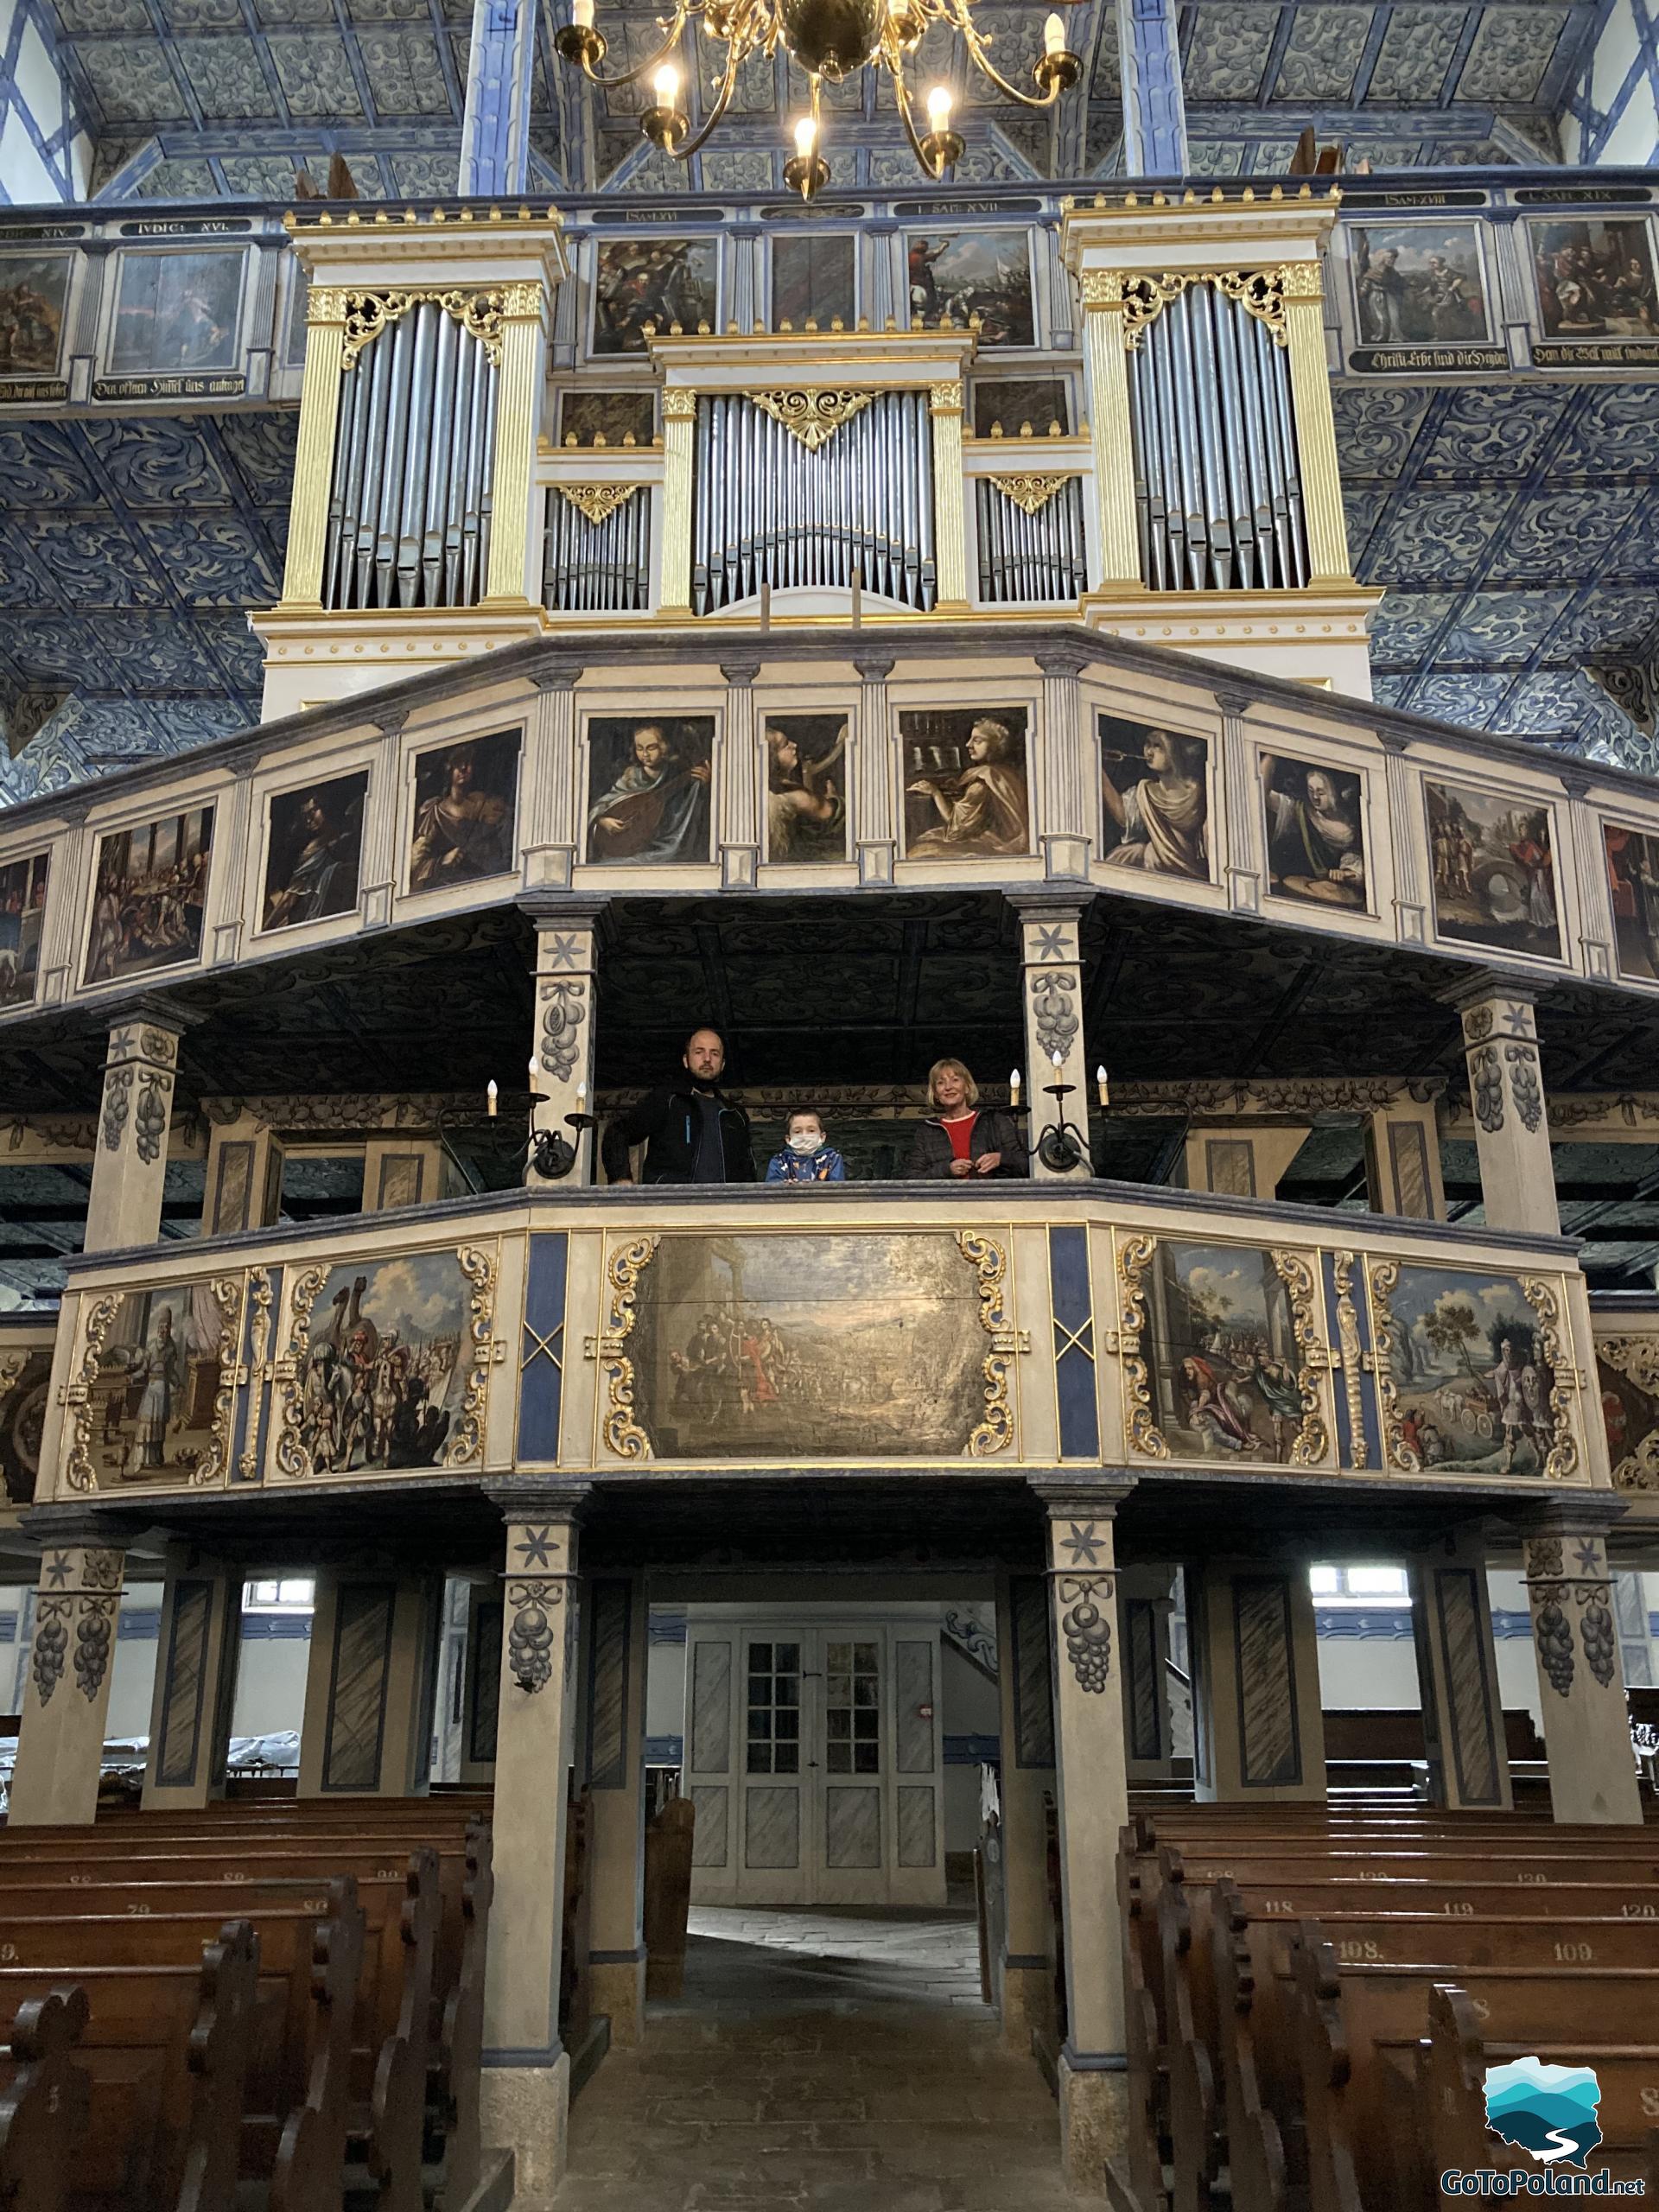 large organ in a church, whole church made of wood